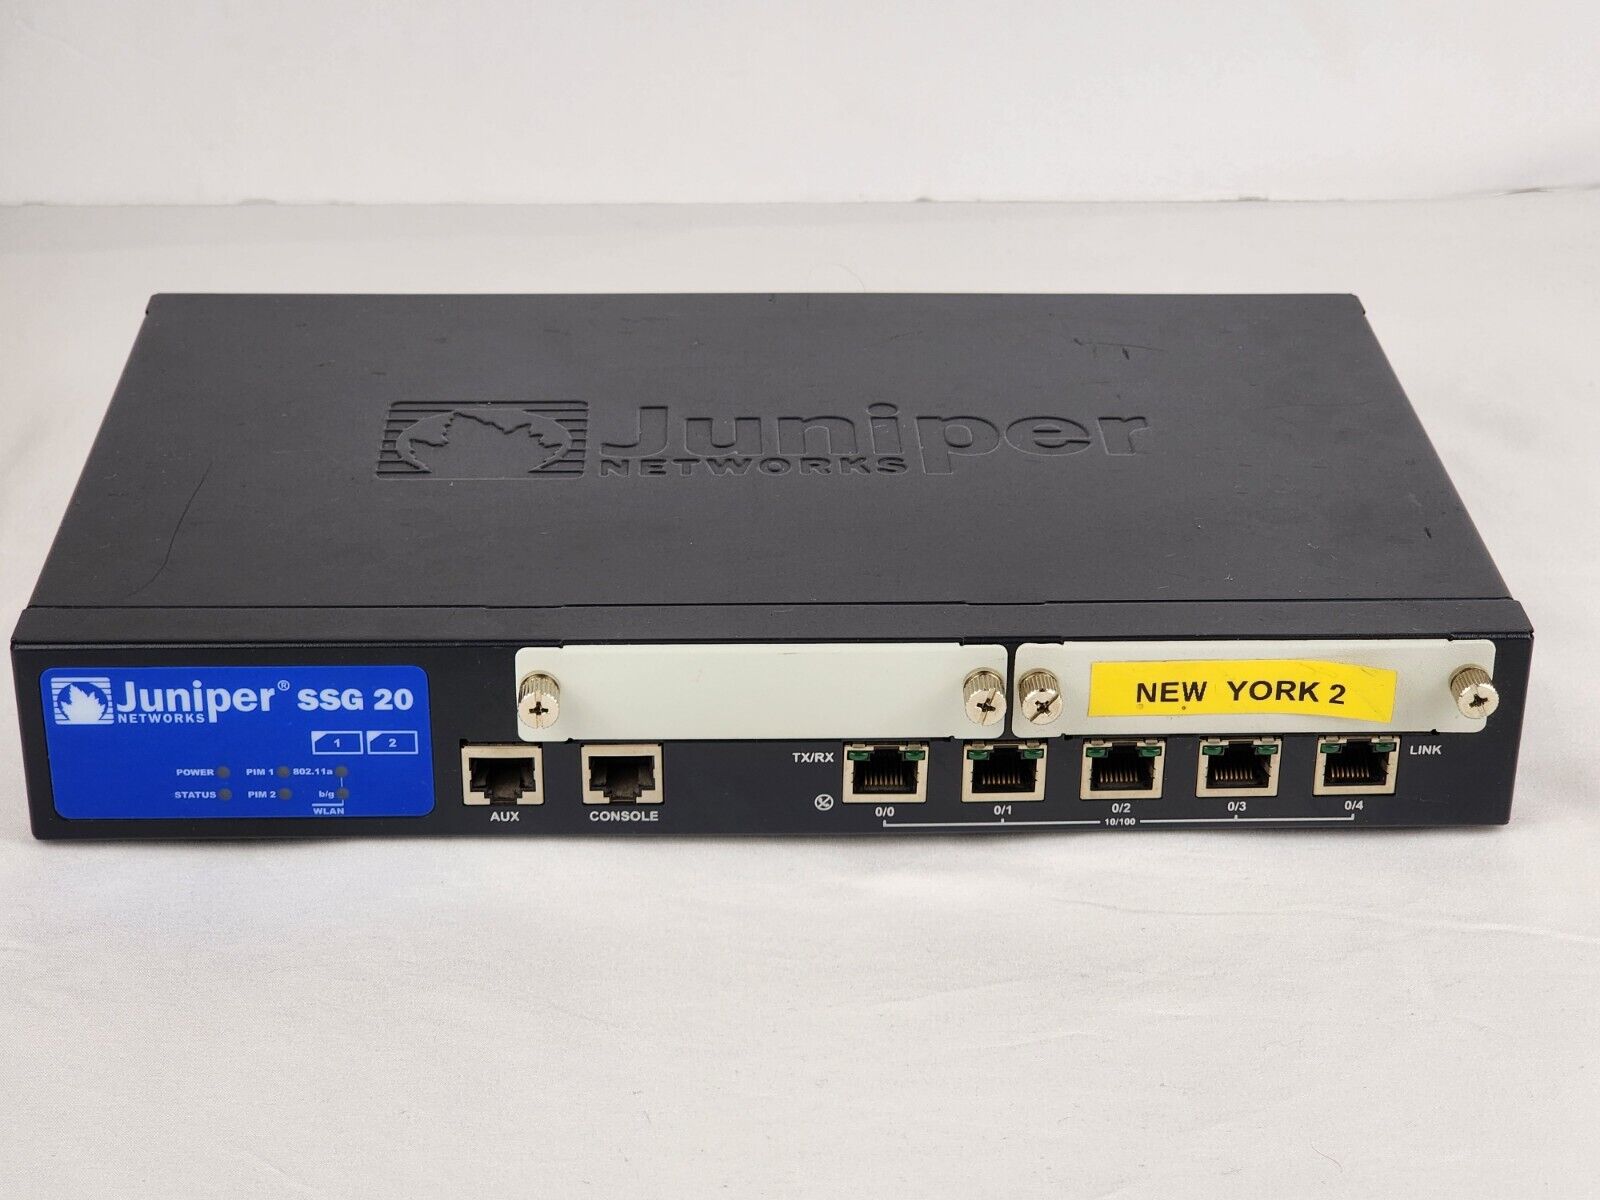 Juniper Networks SSG20 256MB Firewall Security Routing Services Gateway Firewall